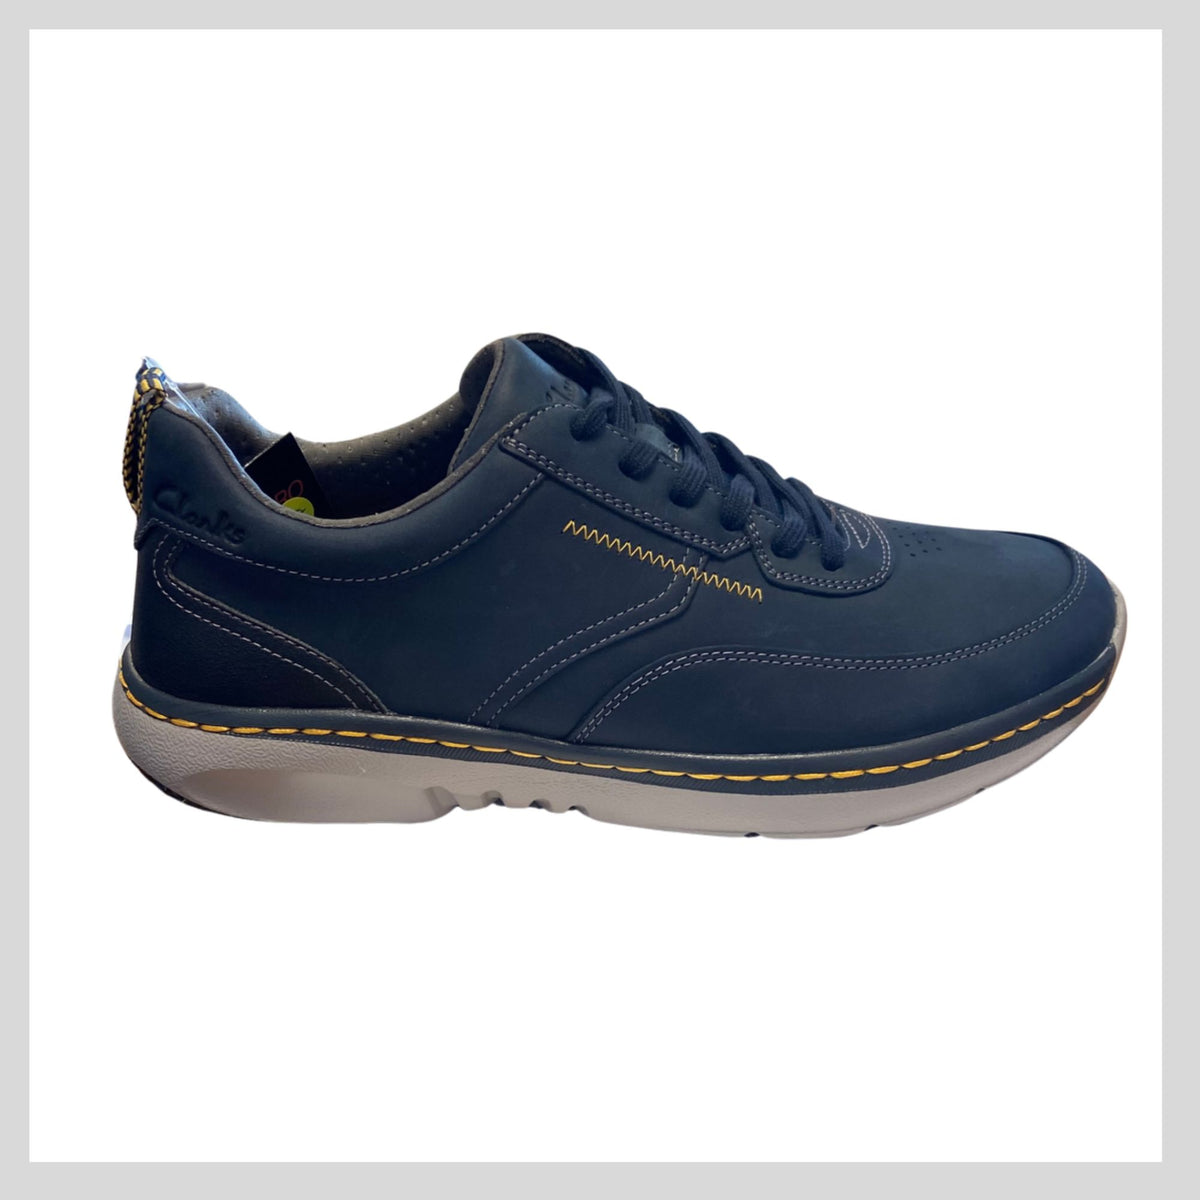 Clarks Pro Lace Navy Leather